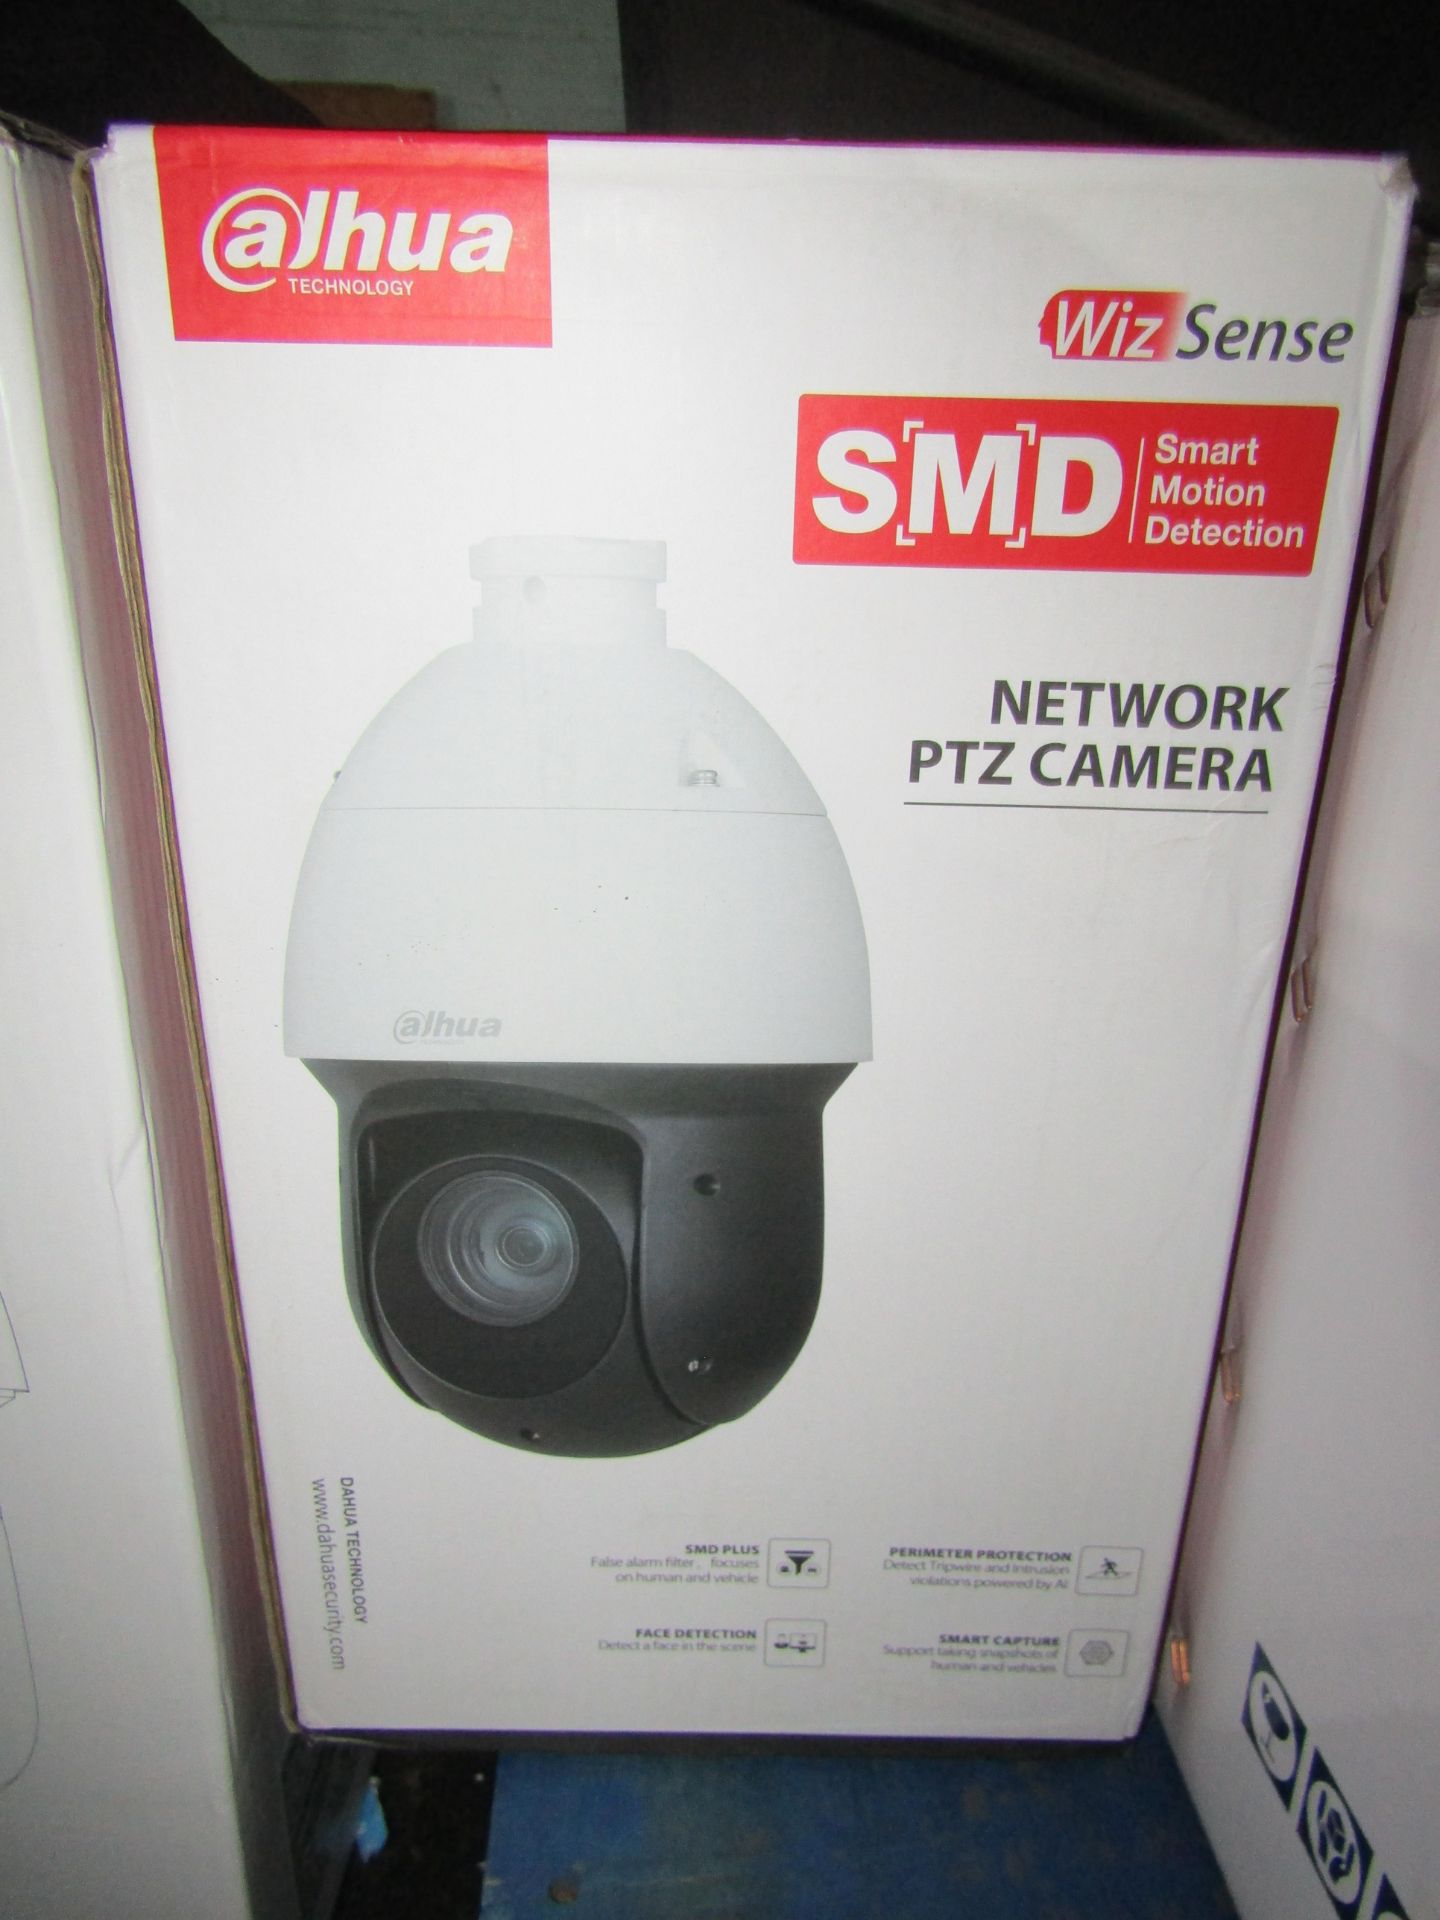 one lot of over 200 items of CCTV and Surveillance equipment, includes DVRs, Cameras, Thermal - Image 56 of 104